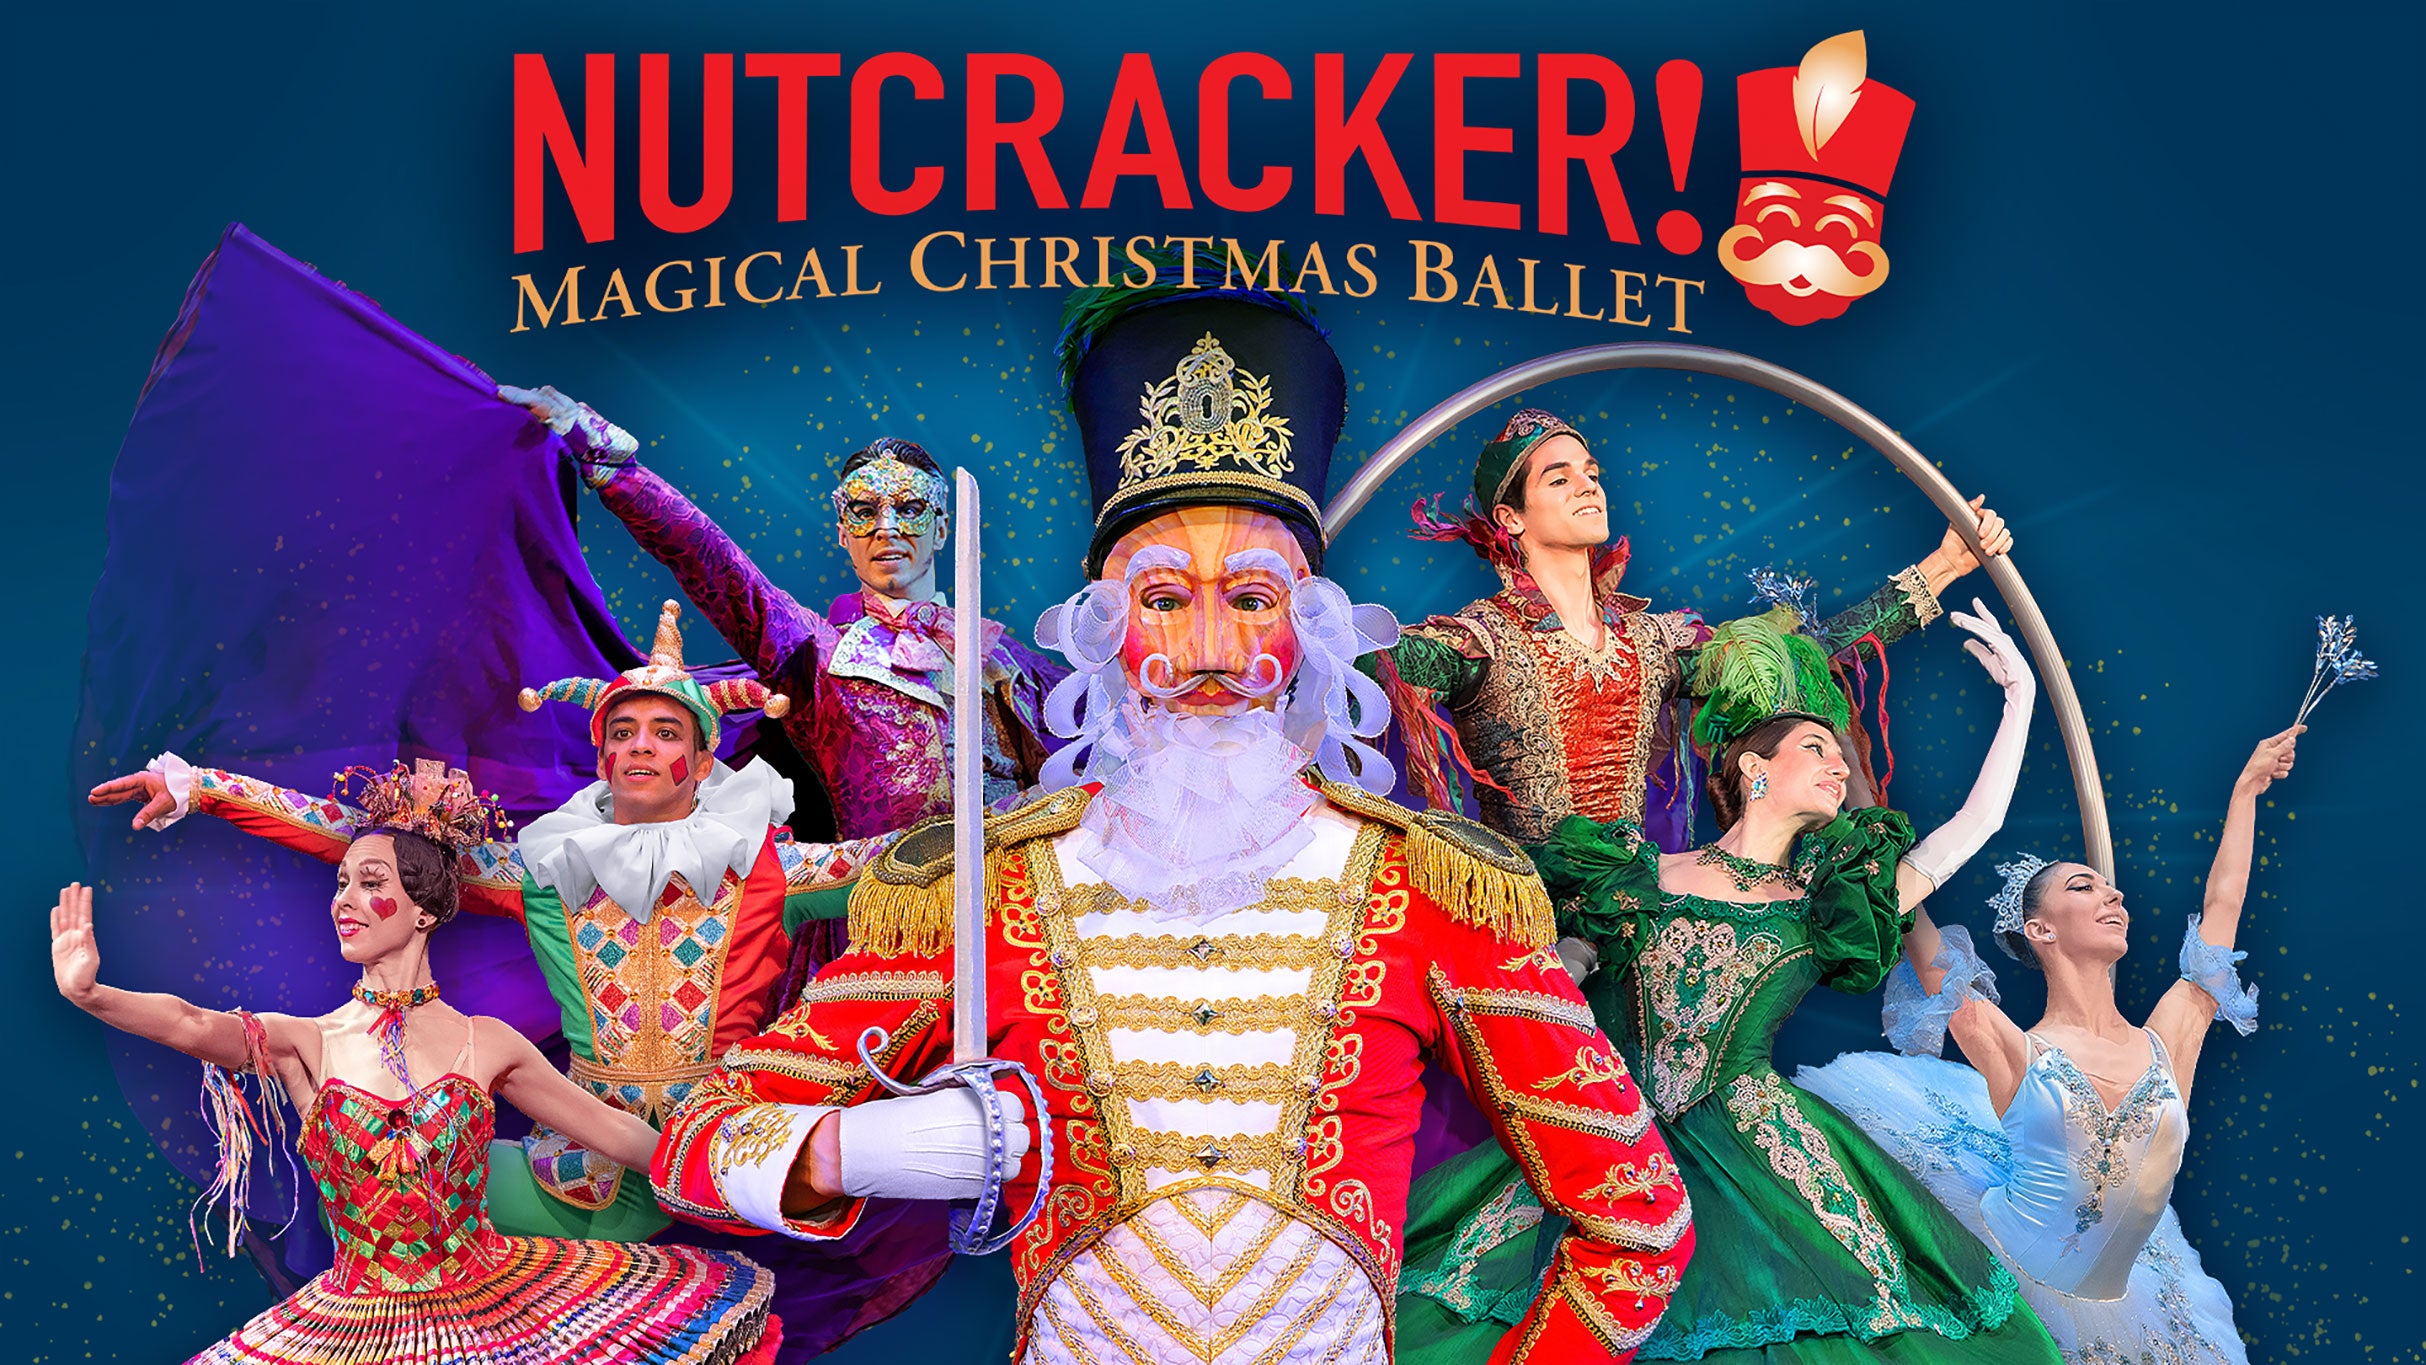 NUTCRACKER! Magical Christmas Ballet at Ford Wyoming Center